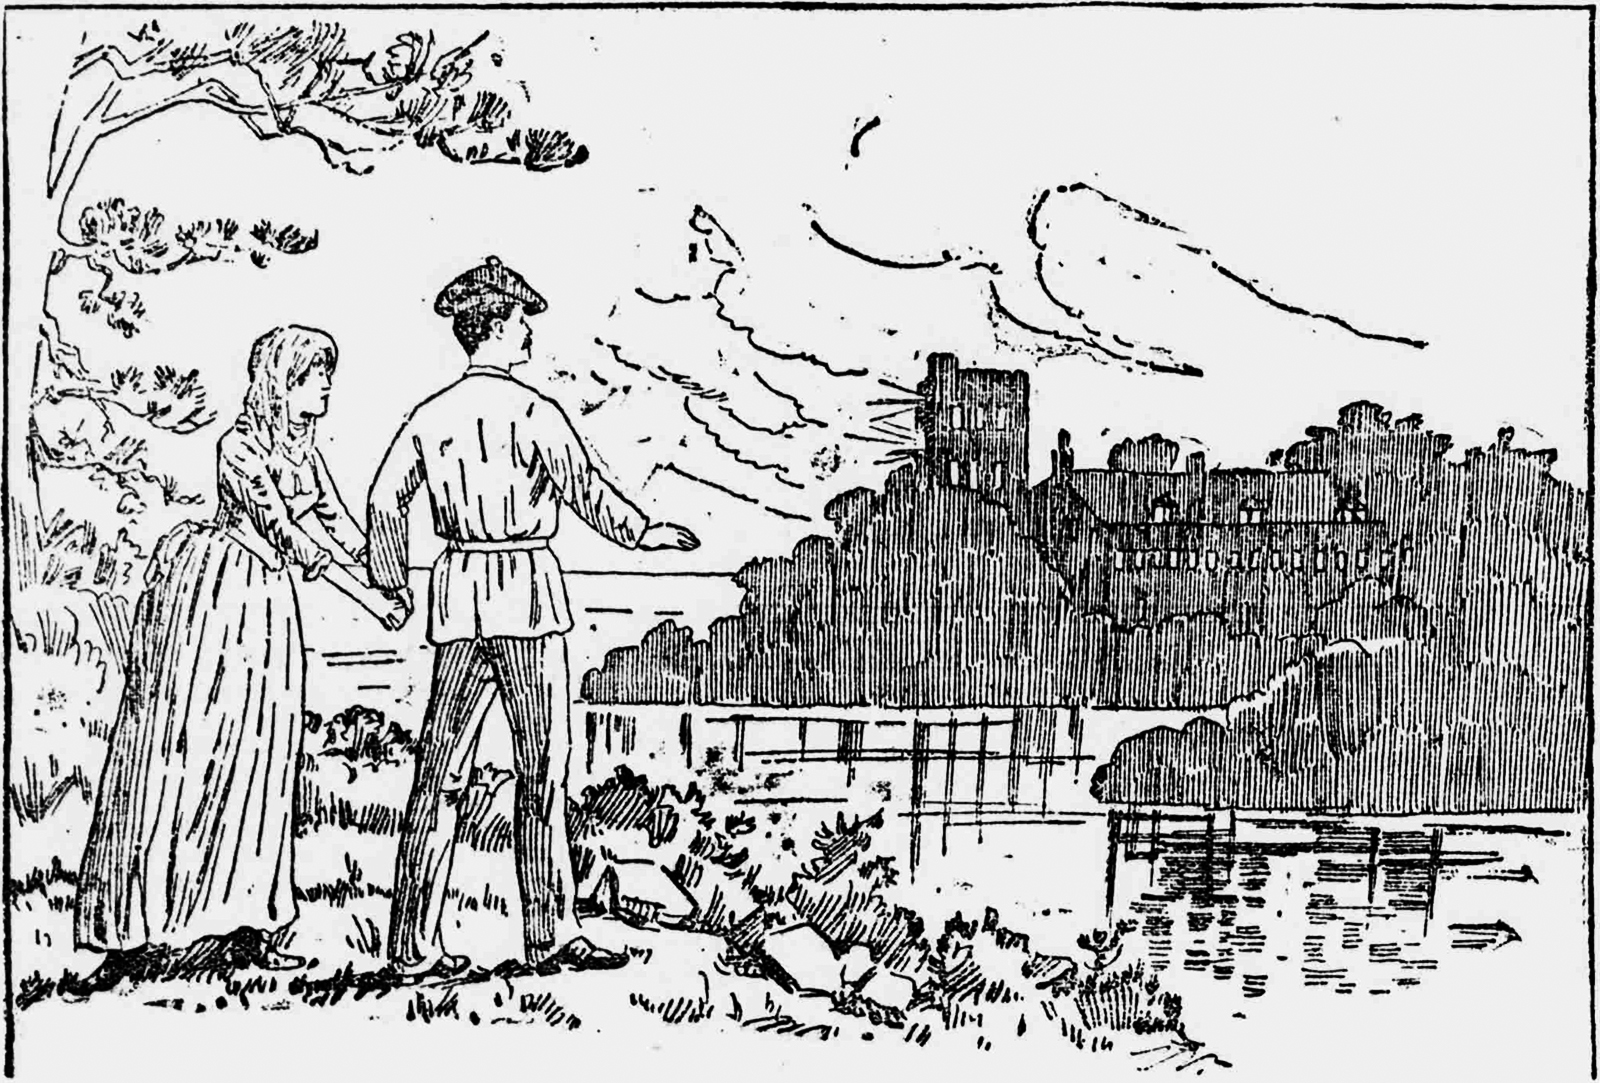 illustration from Doyle's story, The Mystery of Cloomber, showing two people looking at a building with a caption quote that says "Cloomber lay beneath us in a blaze of light"